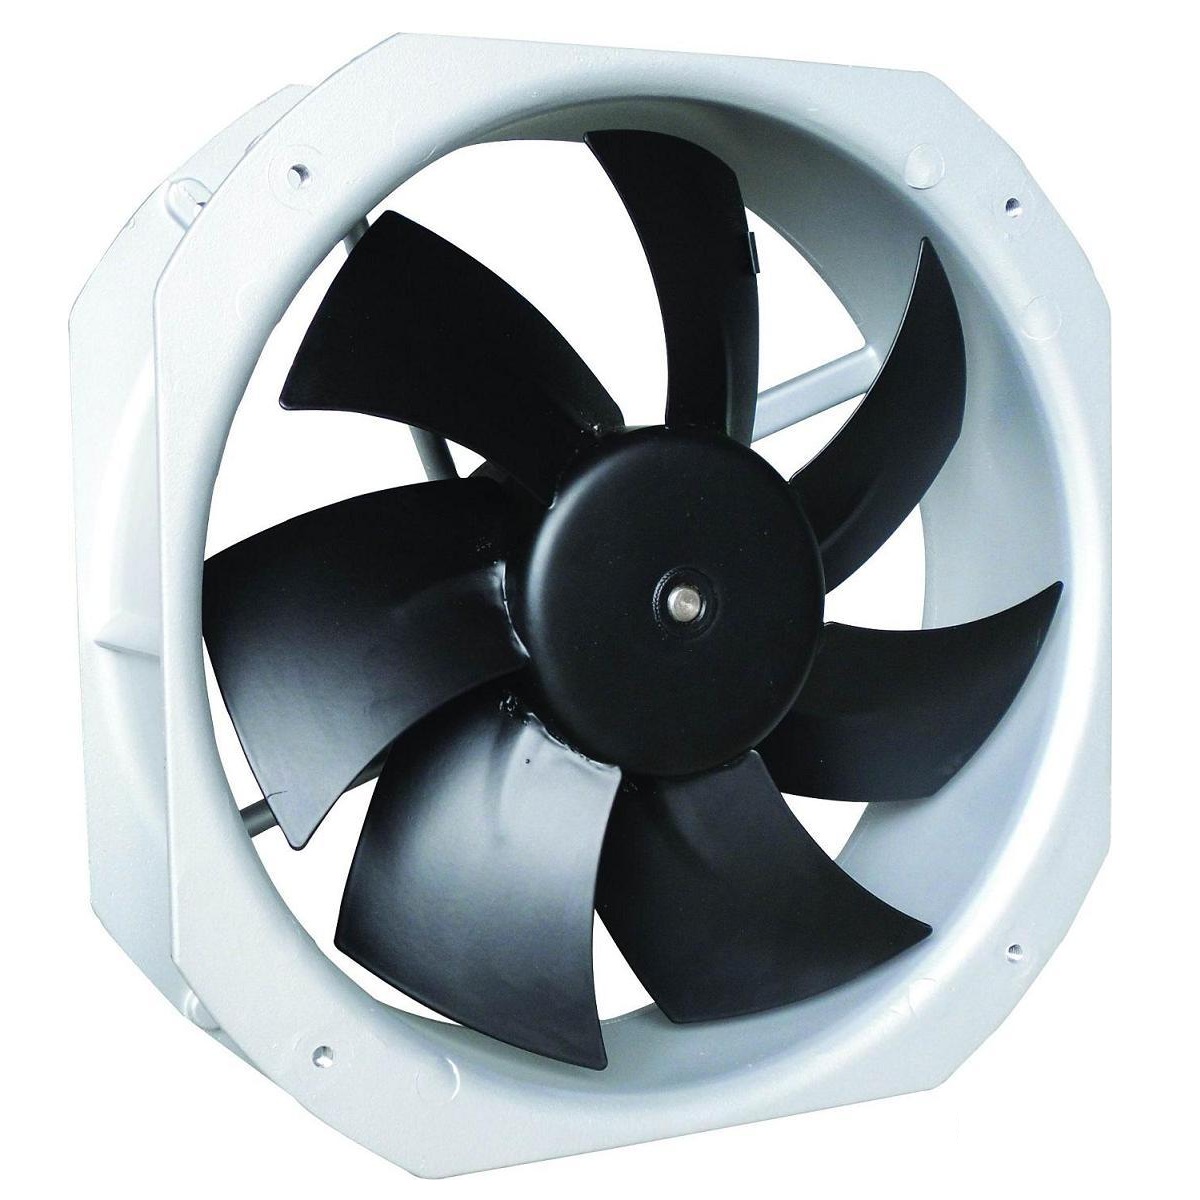 Axial blower impeller